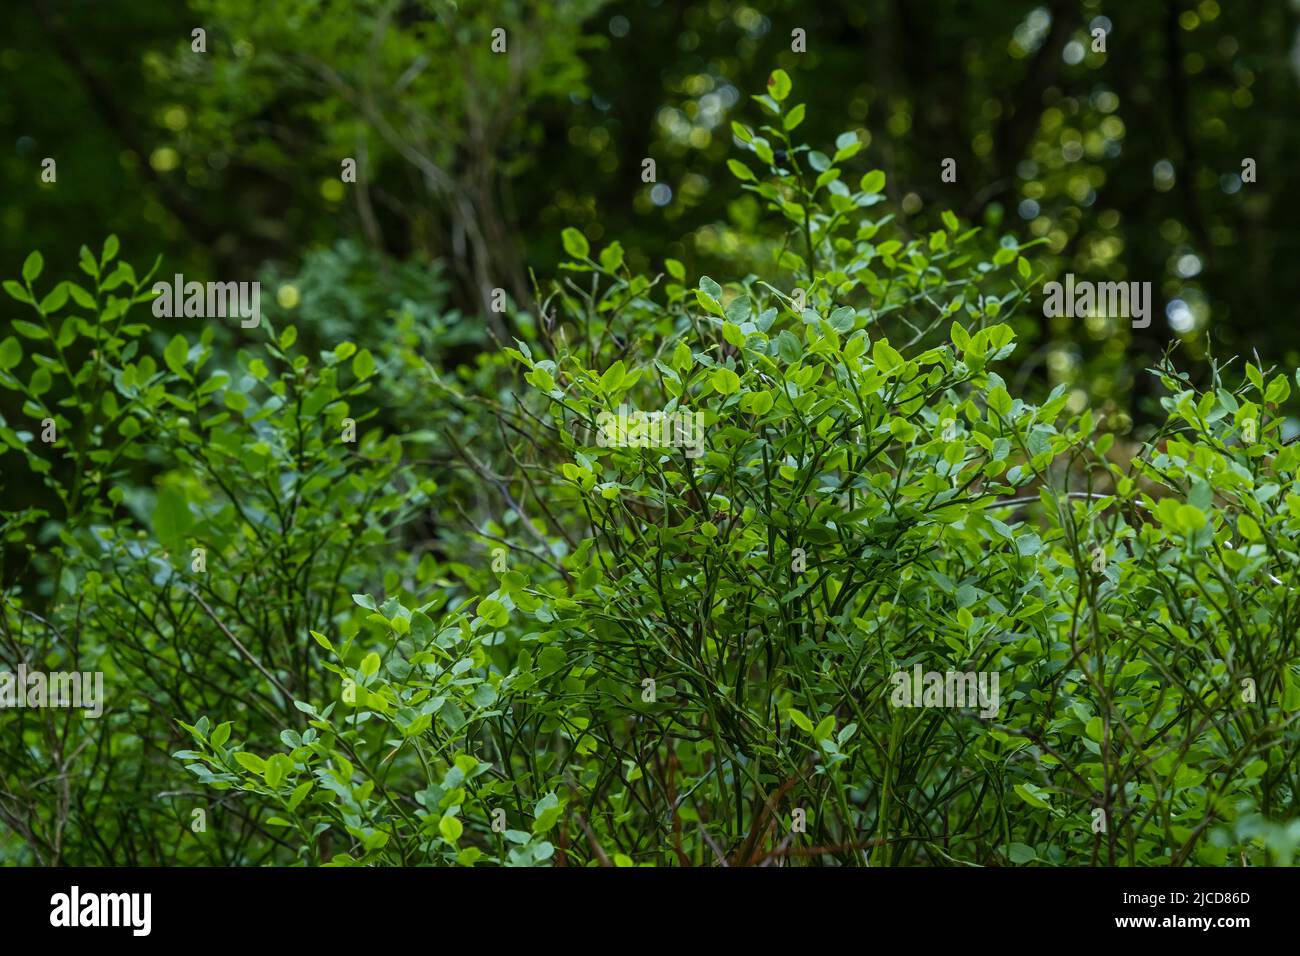 European blueberry or blue whortleberry (Vaccinium myrtillus) growing in Peneda-Geres National Park, Portugal Stock Photo